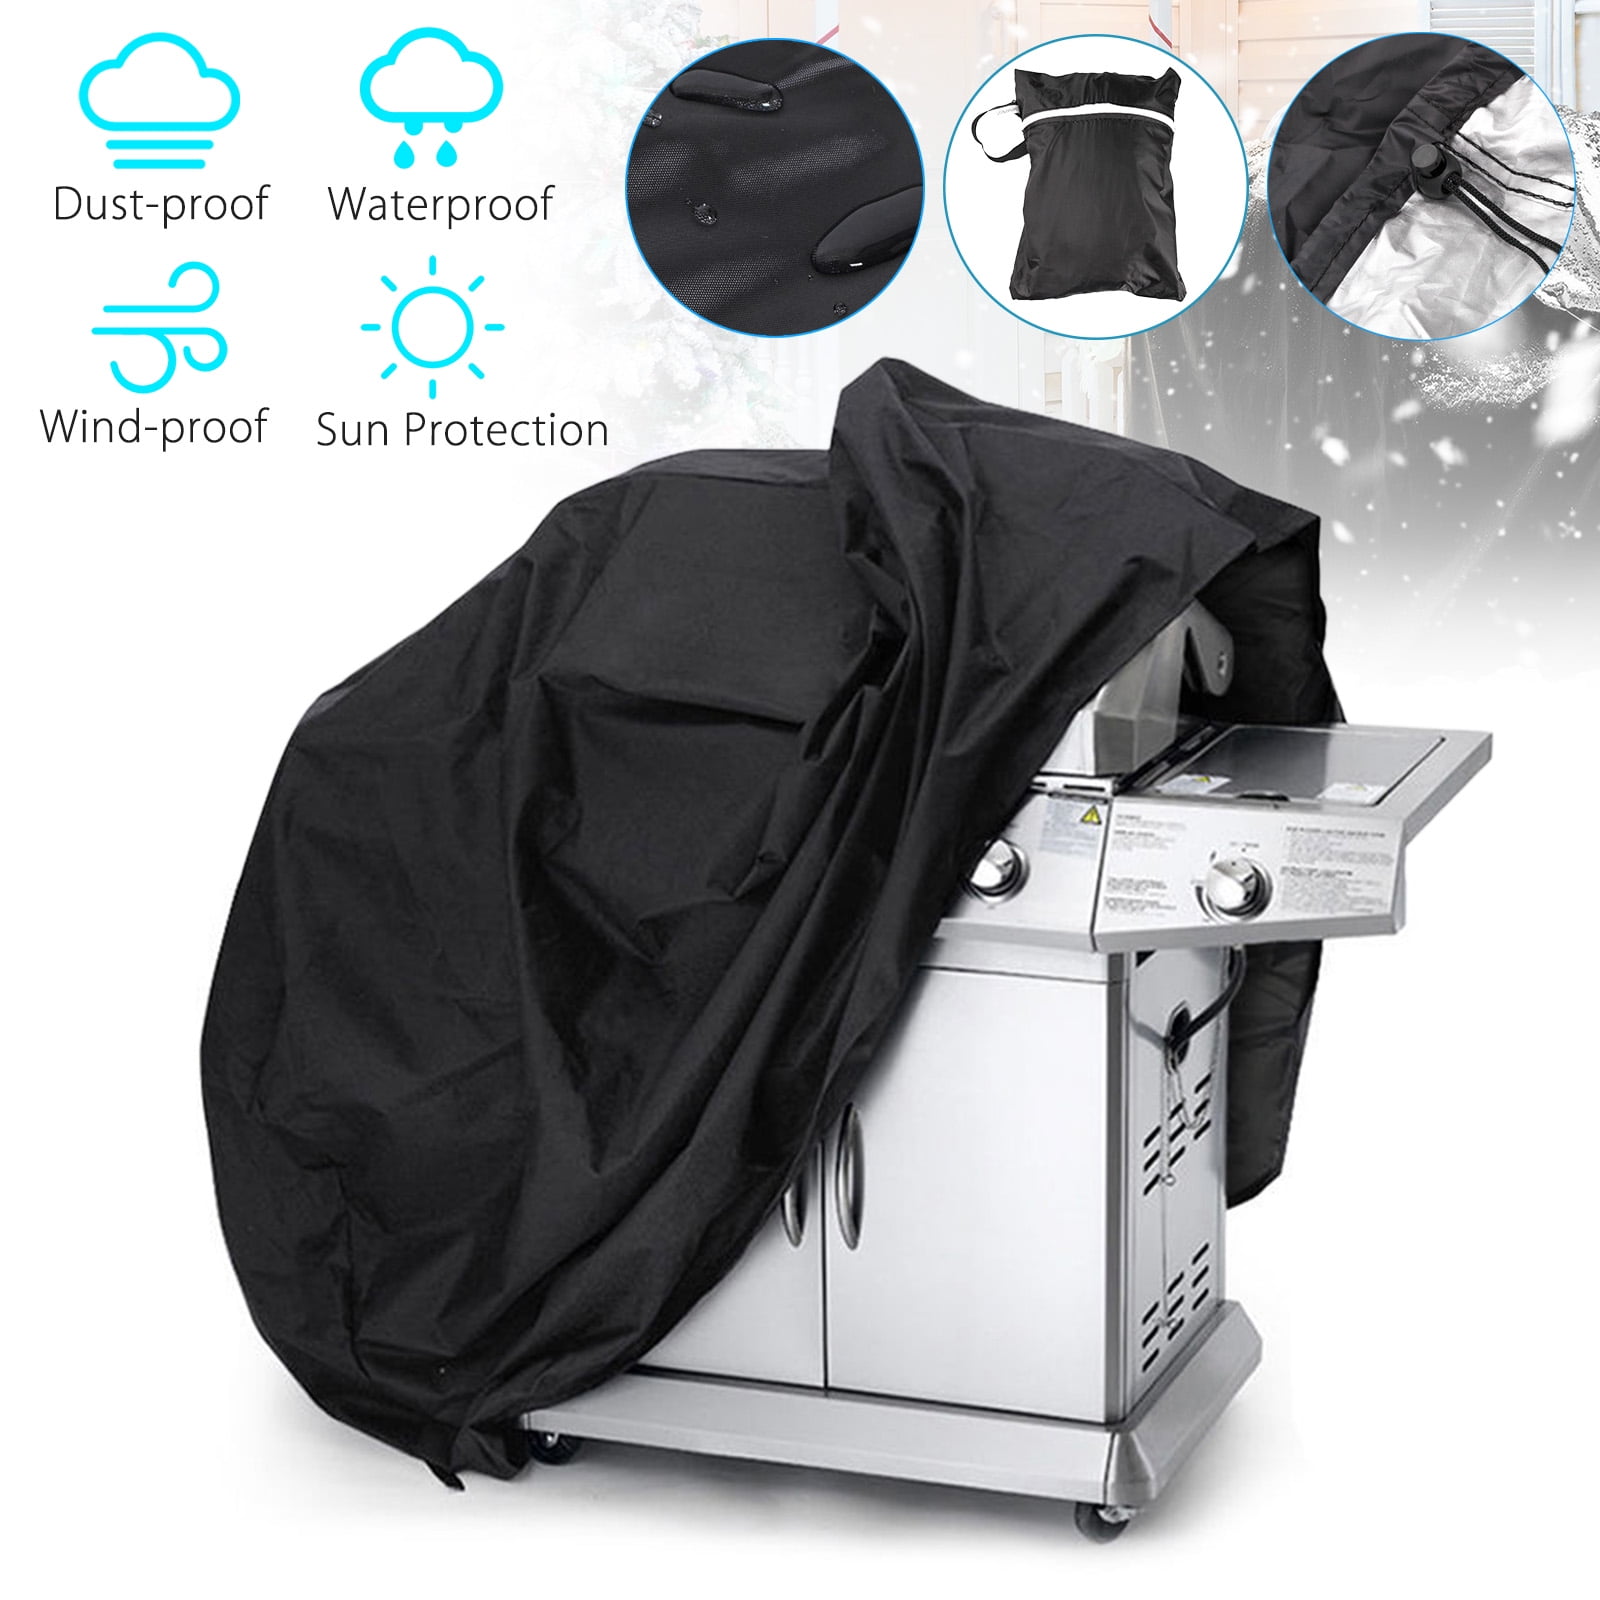 Built In Grill Cover 12 Oz Waterproof 100% UV & Weather Resistant Built in BBQ Cover with Air Pocket and Drawstring for Snug Fit 32 W x 26 D x 24 H, Beige